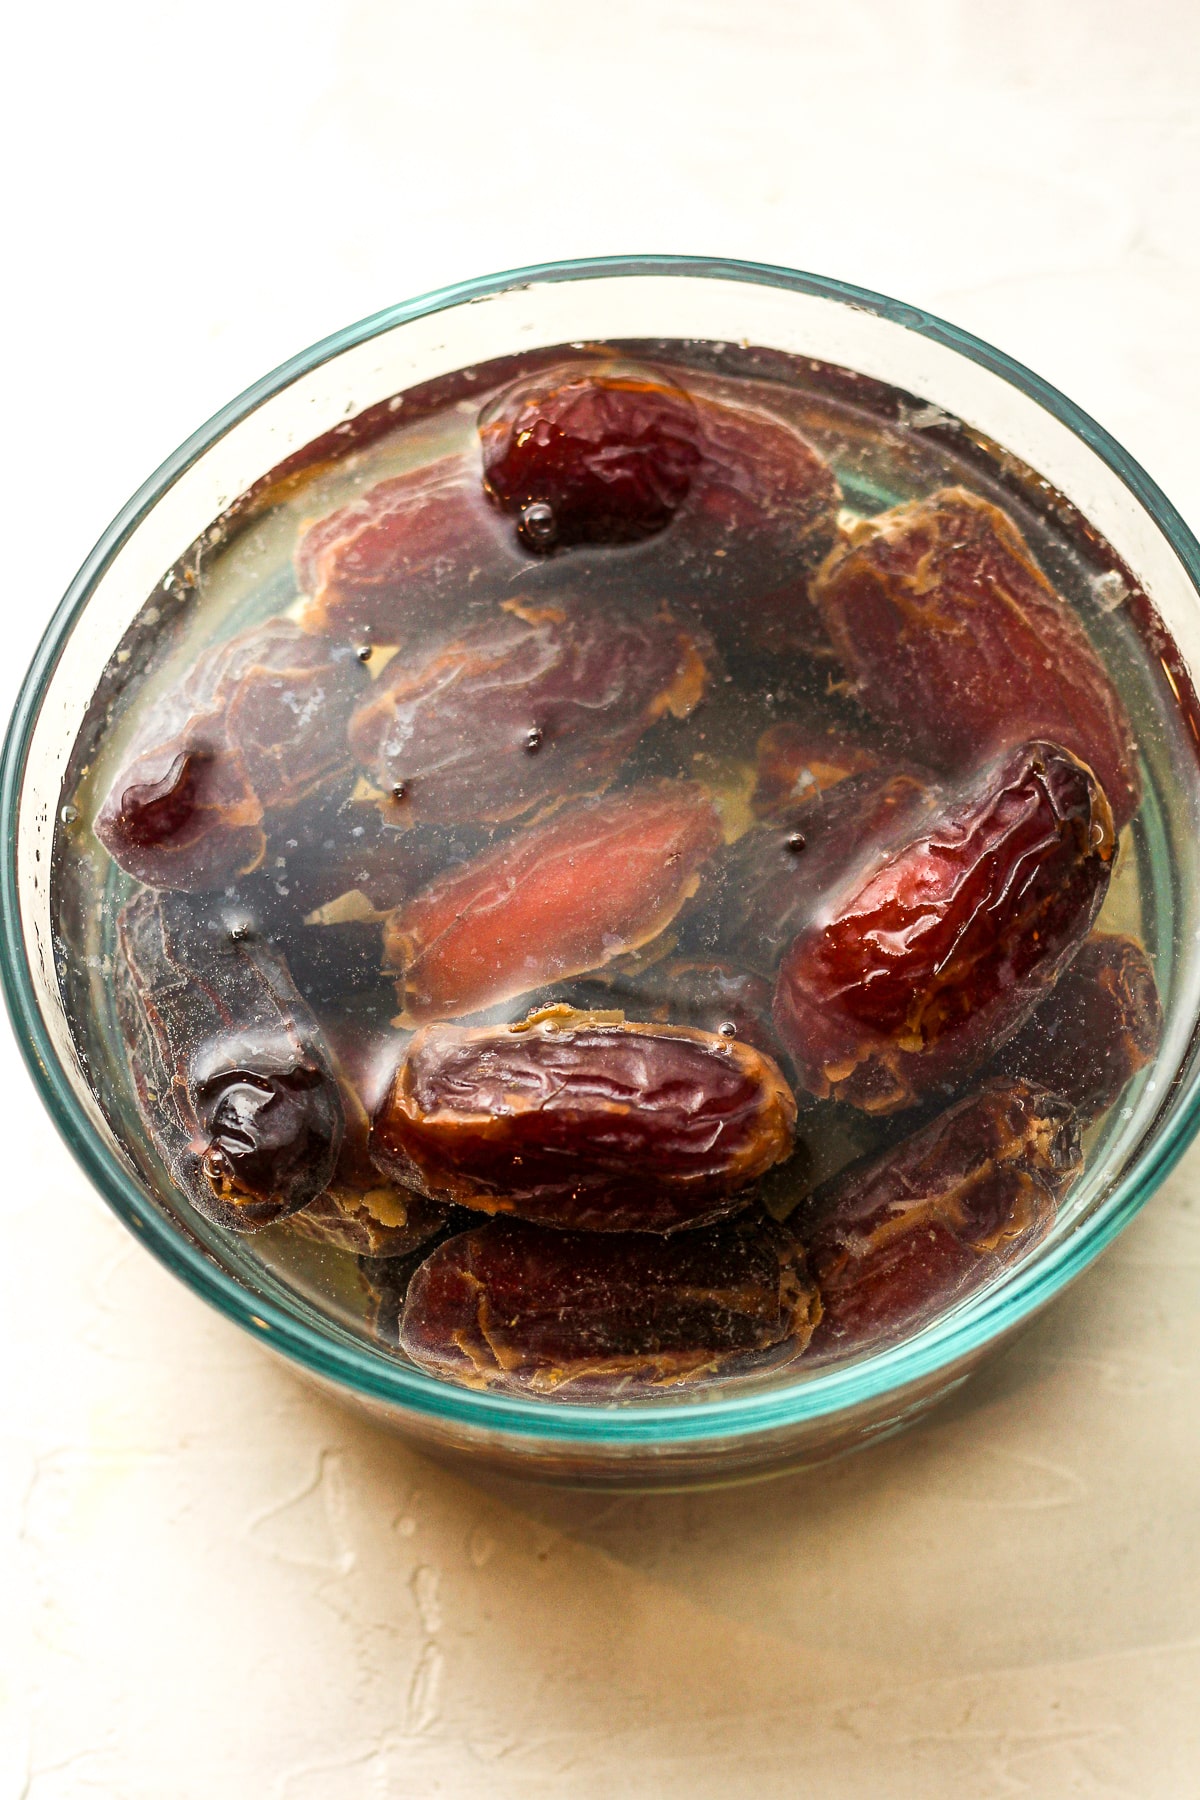 A bowl of the soaked dates.